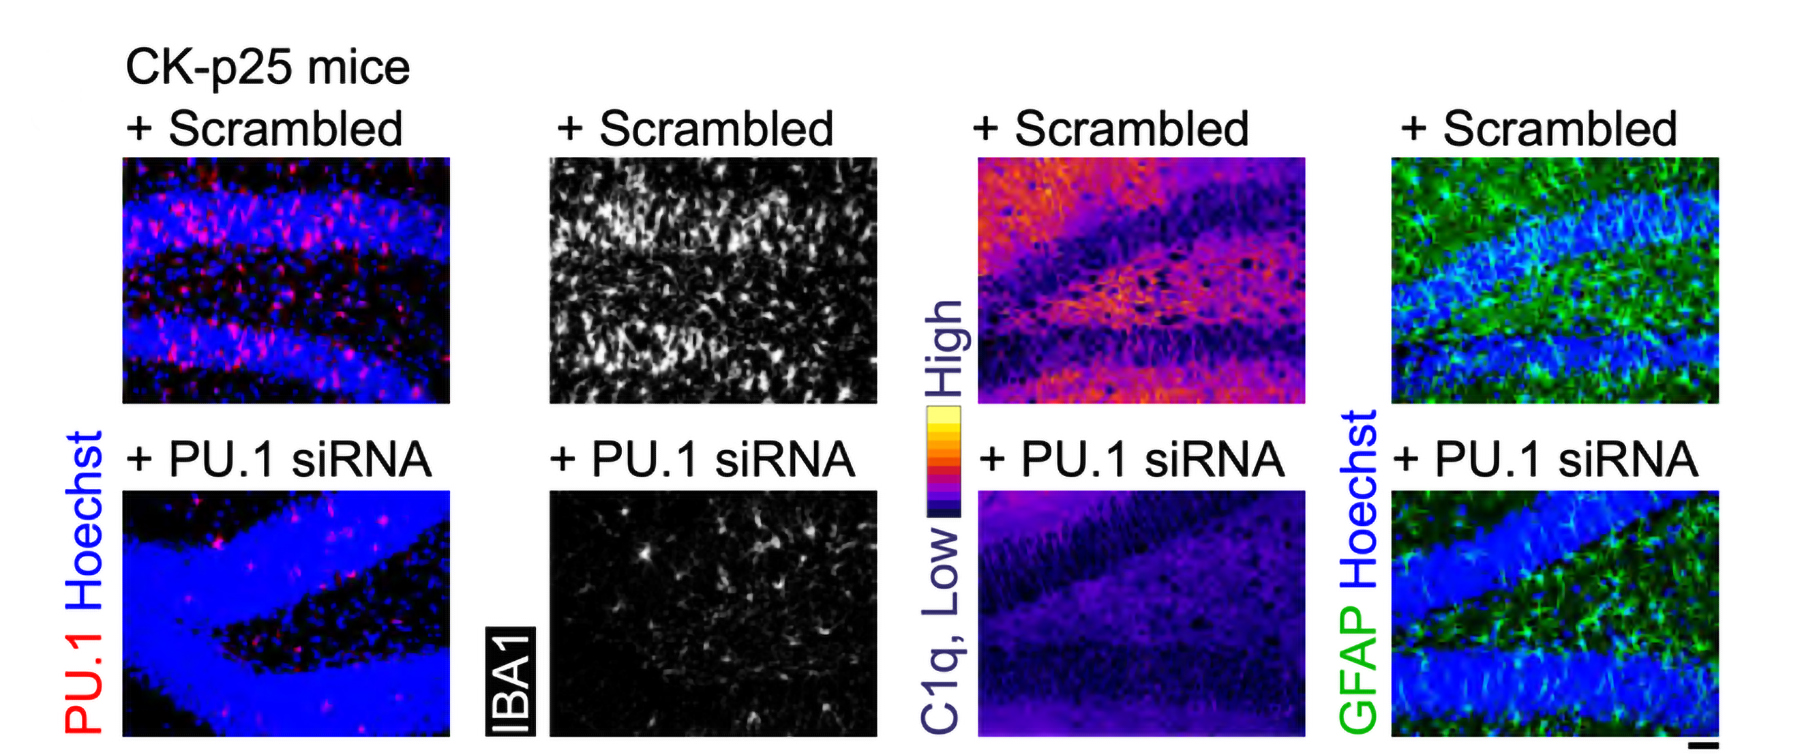 an siRNA delivered by a lipid nanoparticle was able to reduce expression of the protein PU.1 and other related markers (IBA1, C1q, GFAP)